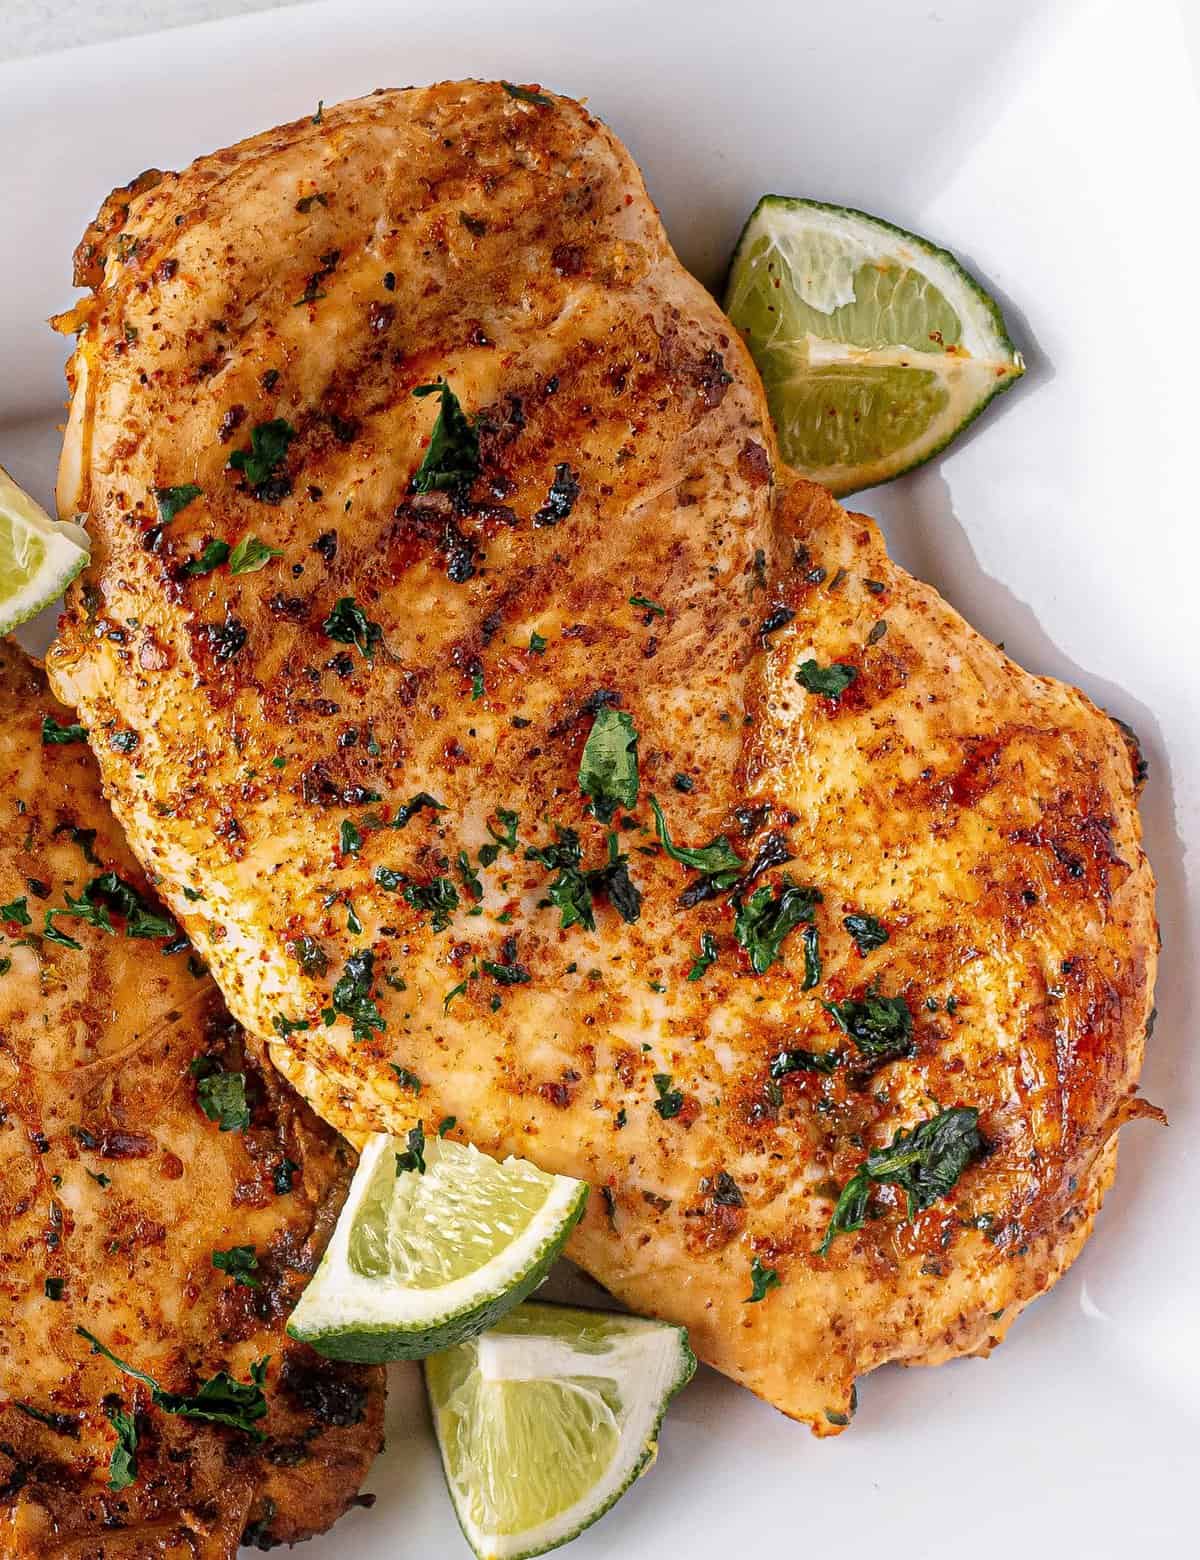 Chicken breasts marinated in a mix of tequila, citrus juices, lime zest and flavorful spices... get ready to fire up your grill and enjoy some of the best tasting chicken ever!